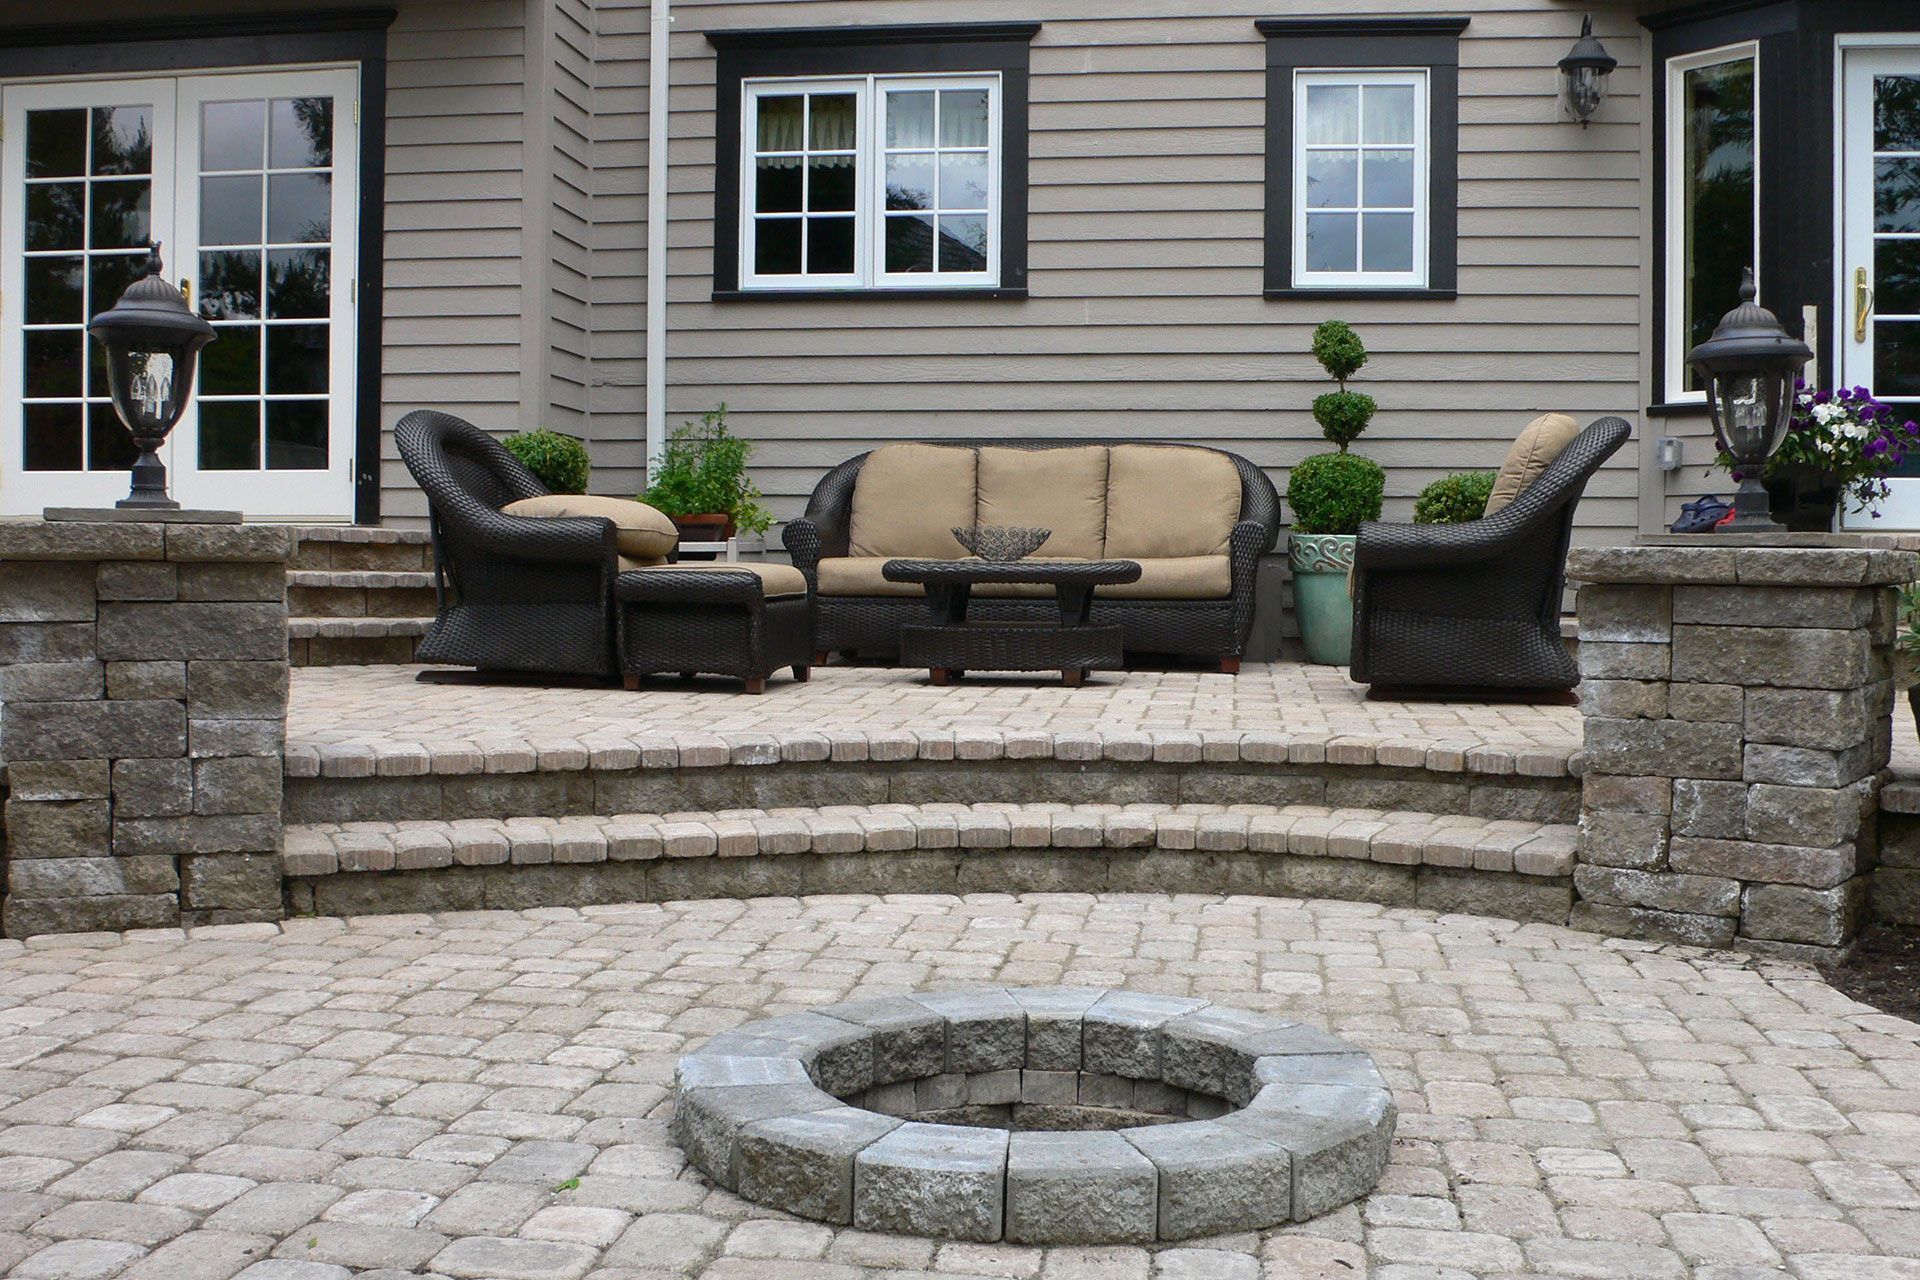 A patio with a fire pit and furniture in front of a house